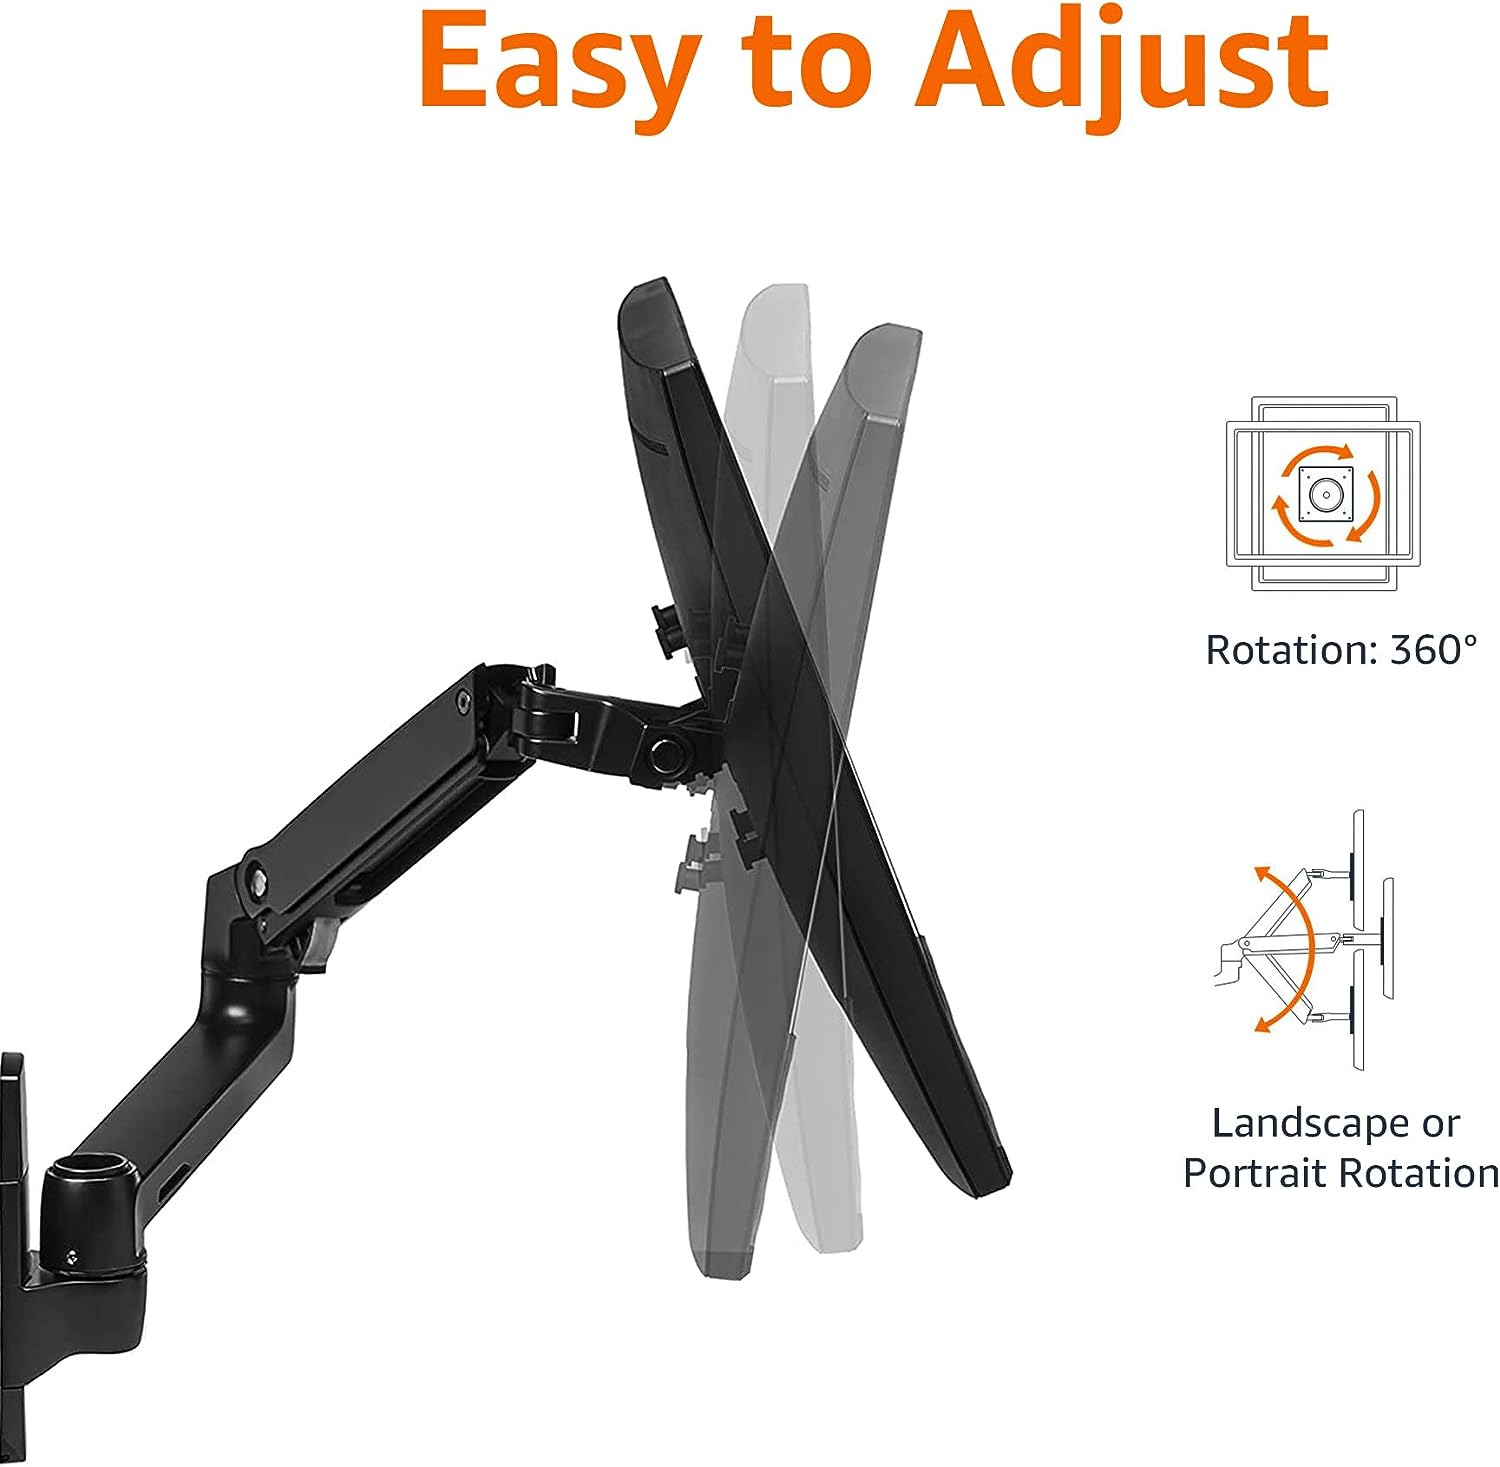 Basics Dual Monitor Stand - Height-Adjustable Arm Mount